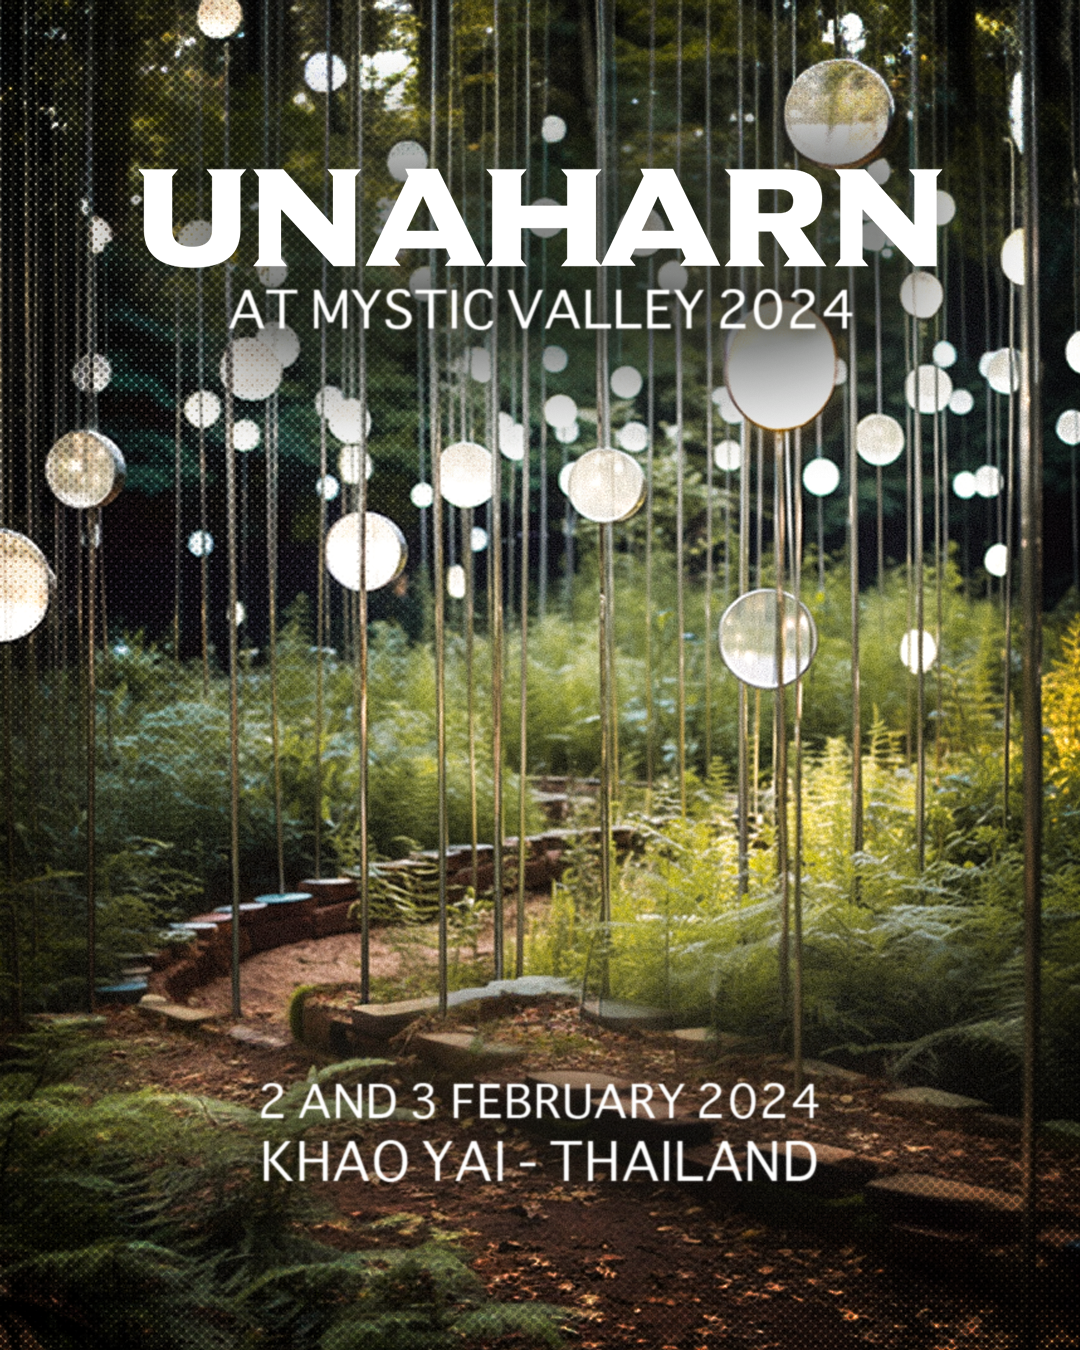 Unaharn at Mystic Valley Festival 2024 - フライヤー表